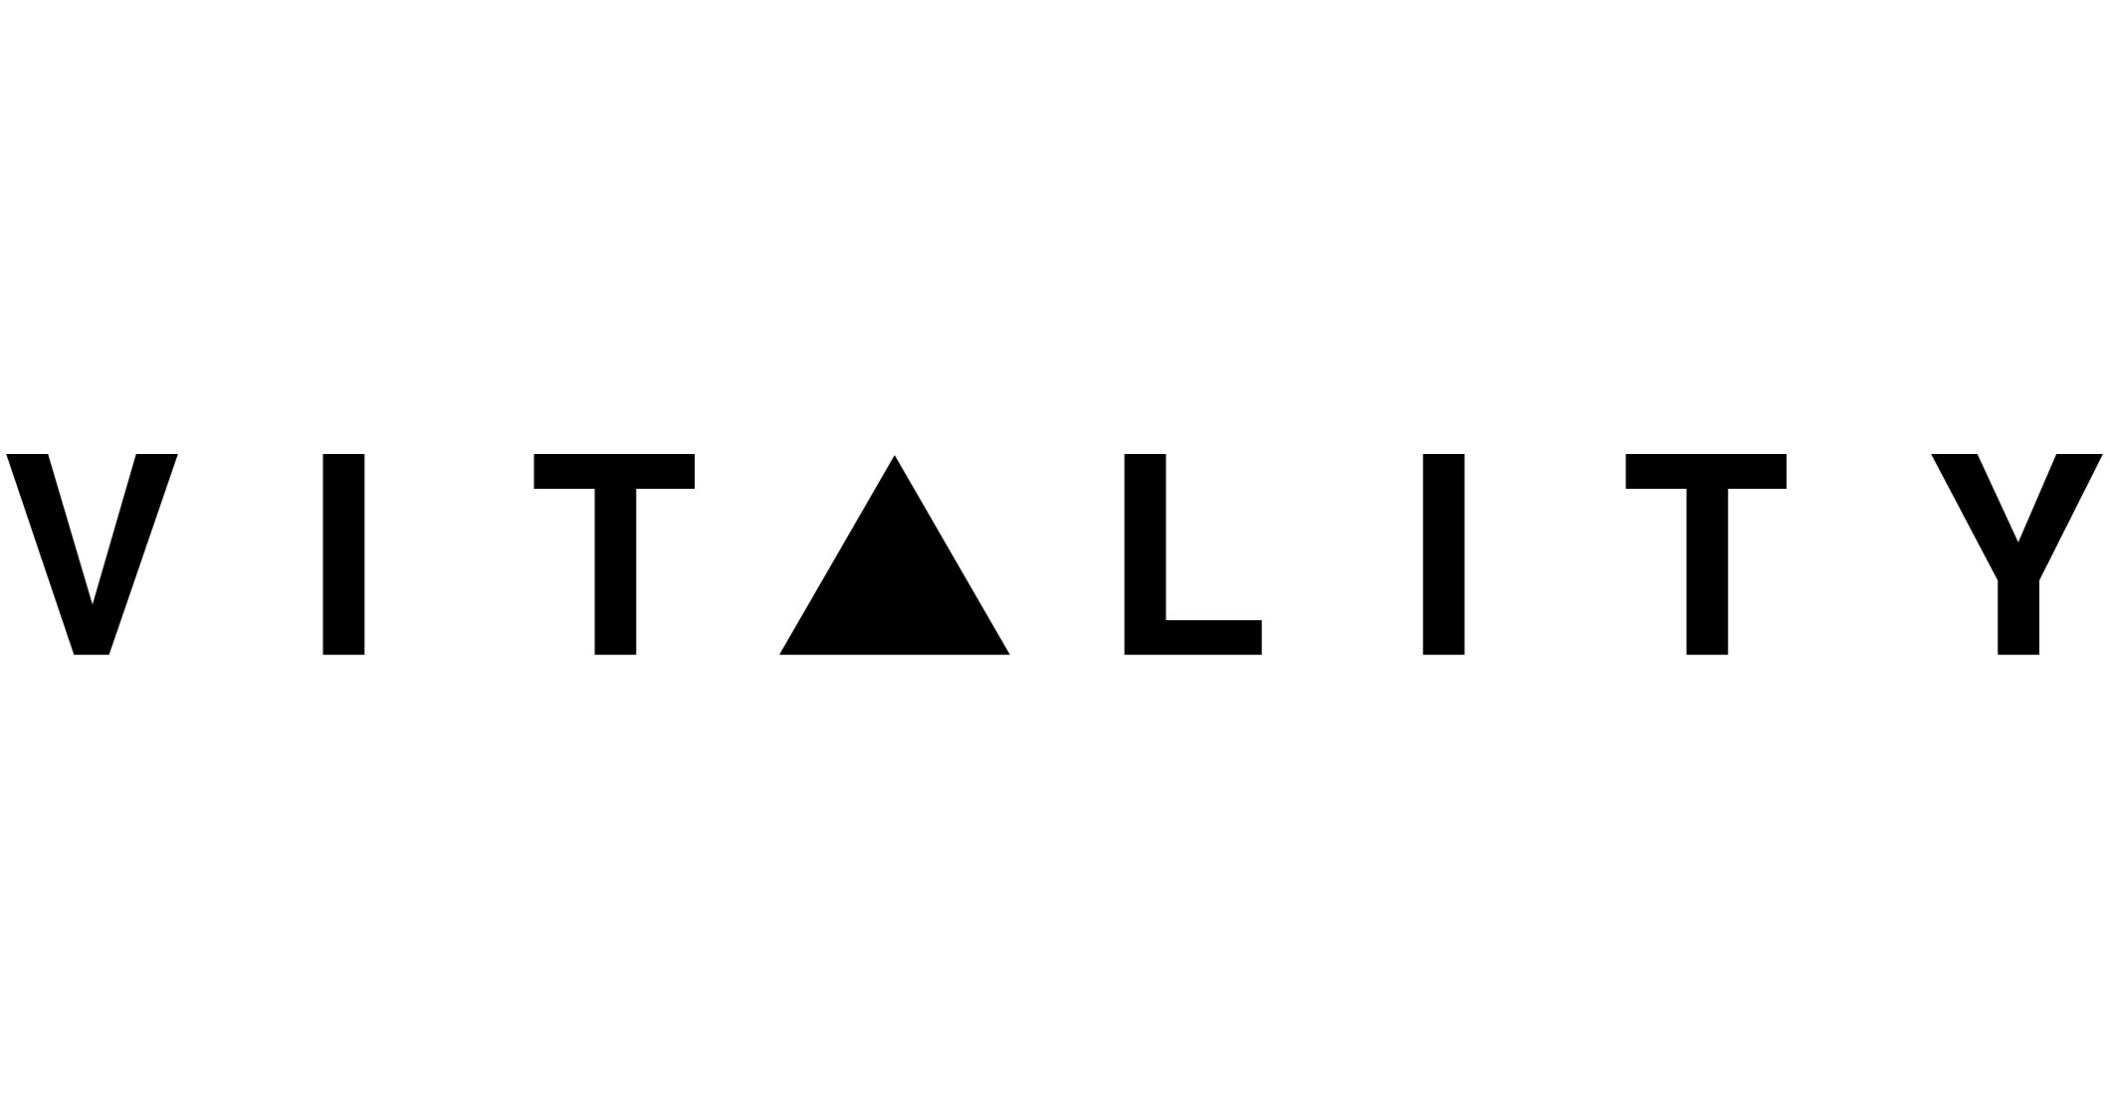 BALANCE ATHLETICA ANNOUNCES BRAND REFRESH, INCLUDING UNVEIL OF NEW